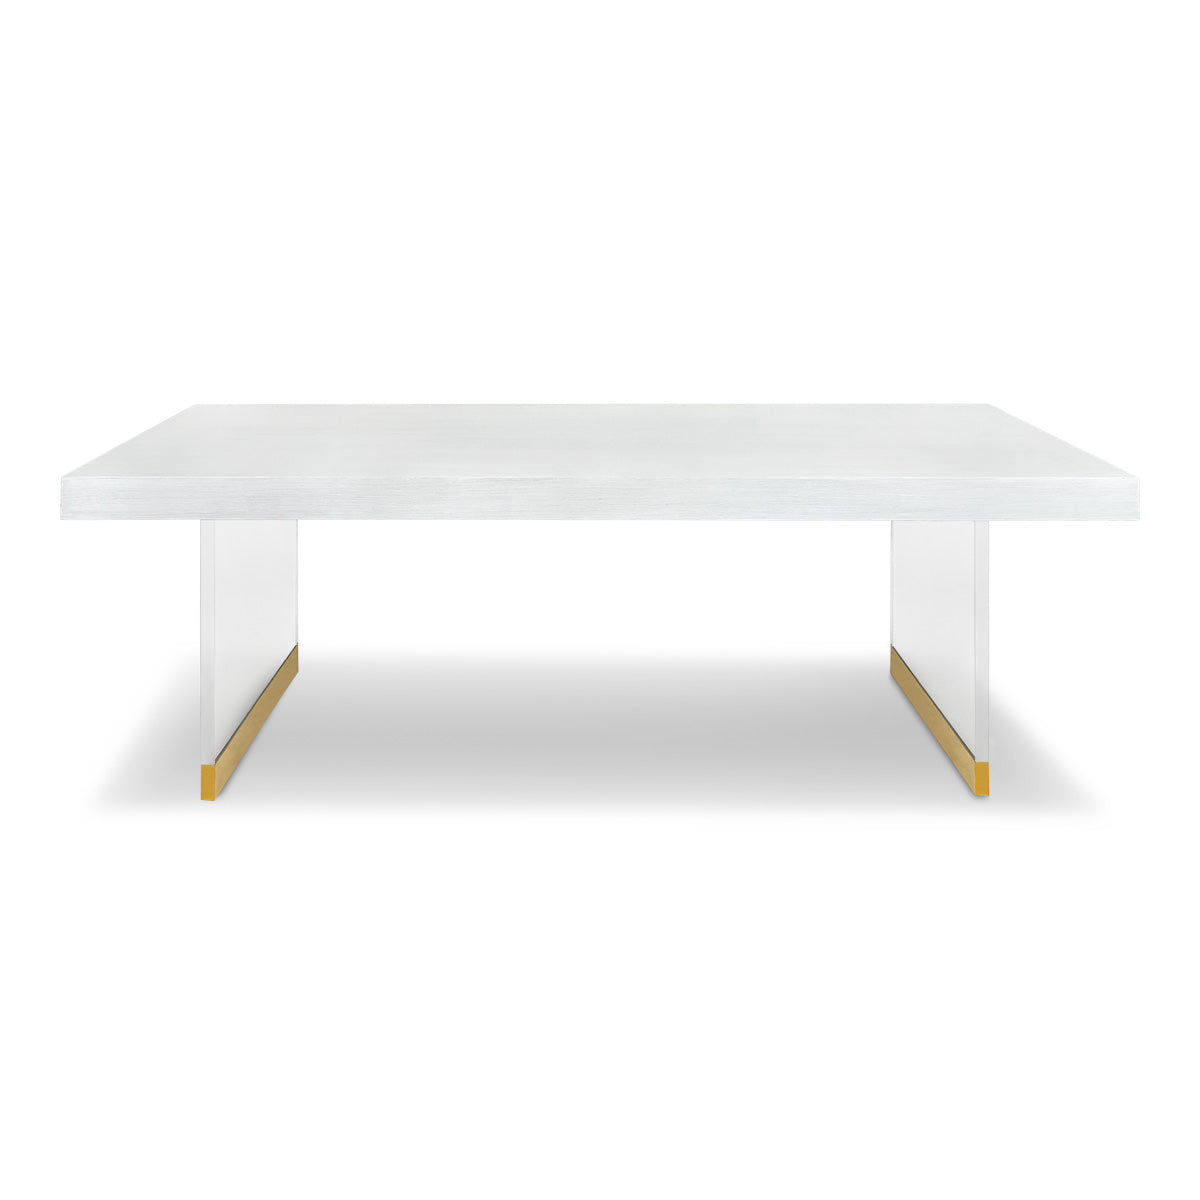 Durban 2 Dining Table with White Washed Oak and Lucite Plinth Desk Legs